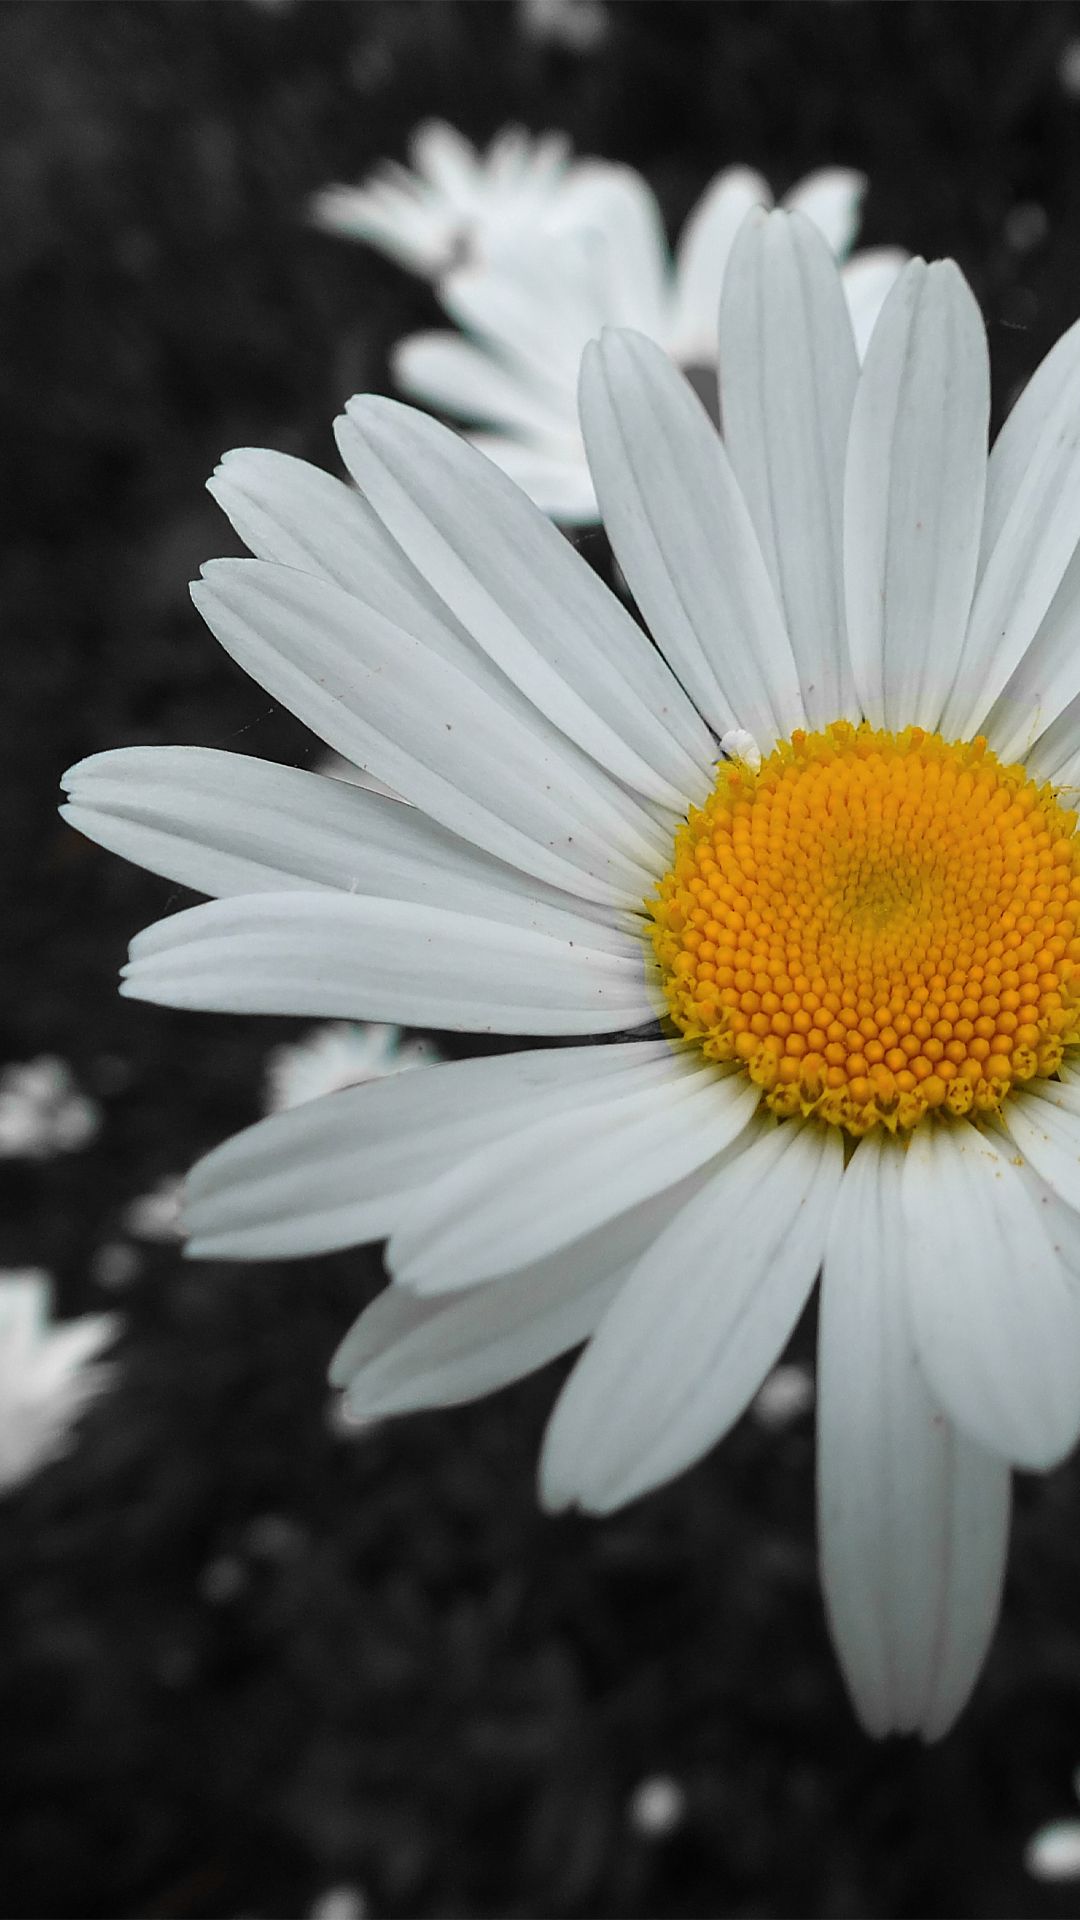 IPhone wallpaper with a white daisy on a black and white background - Daisy